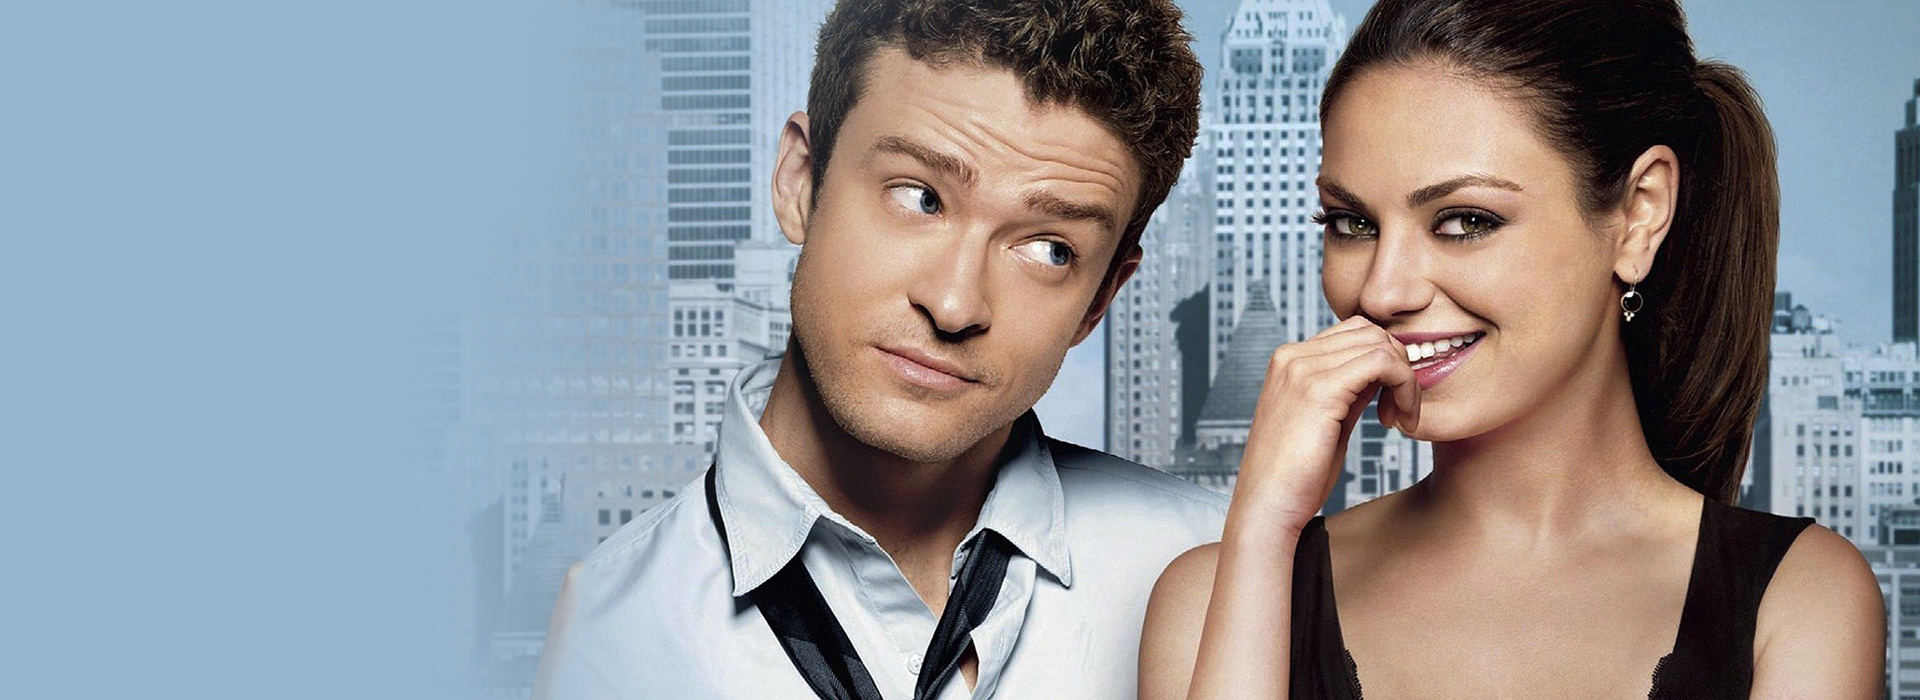 Movie poster Friends with Benefits